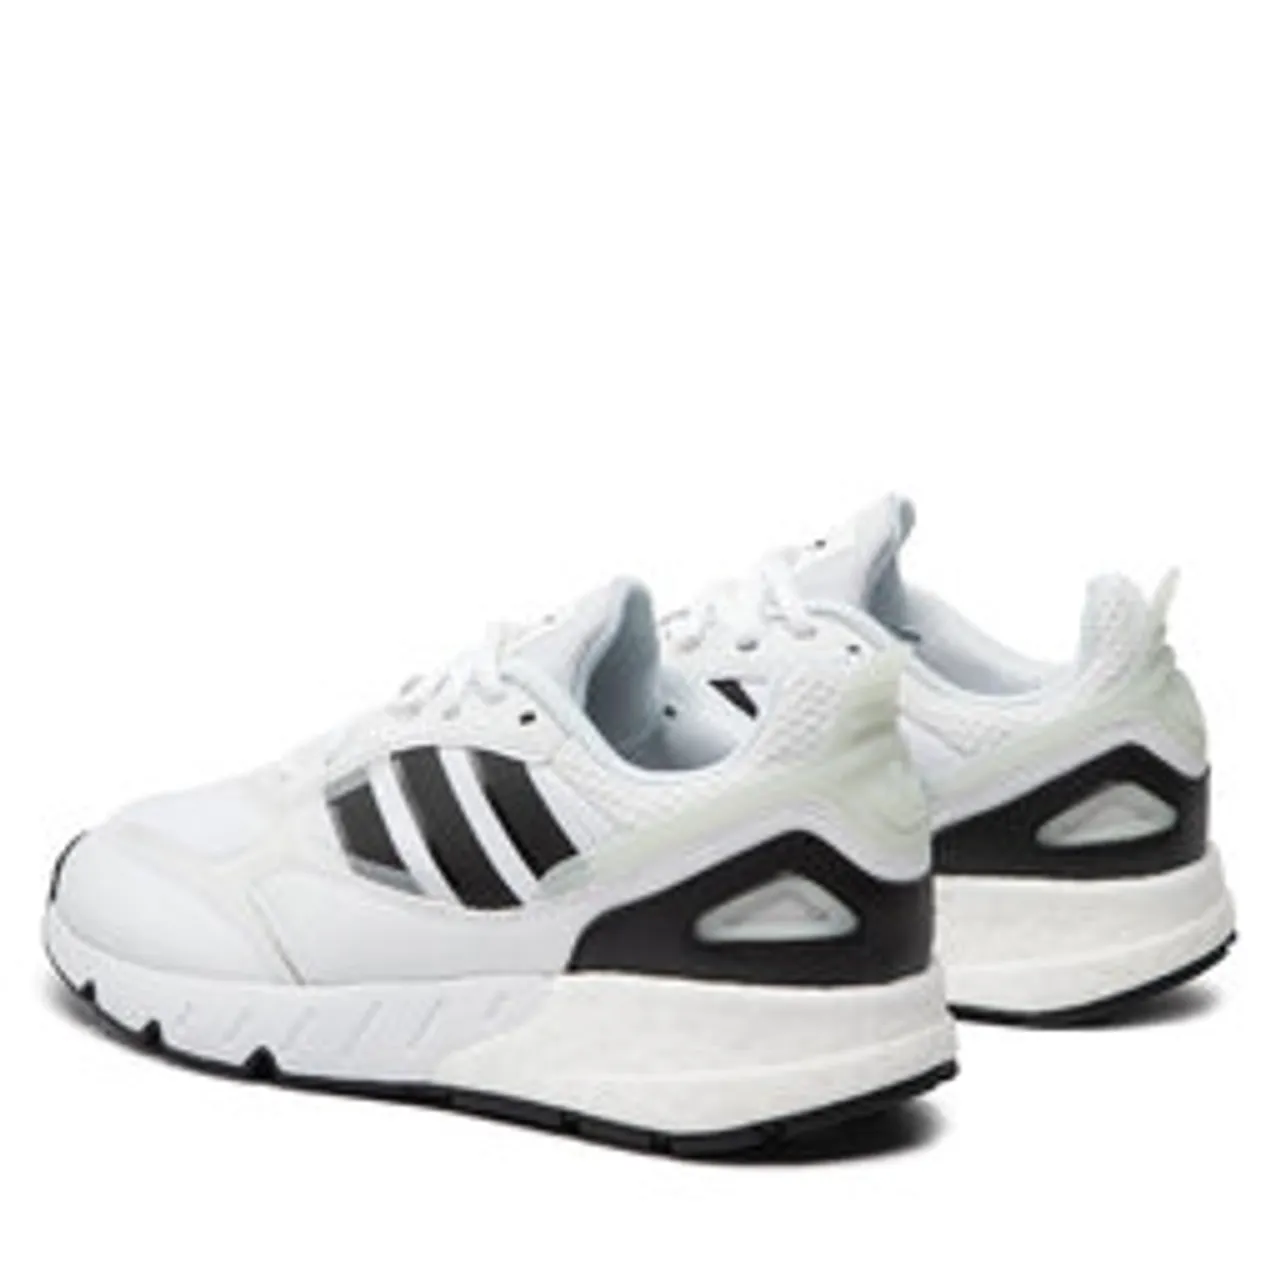 Sneakers adidas ZX 1K Boost 2.0 Shoes GZ3549 Weiß